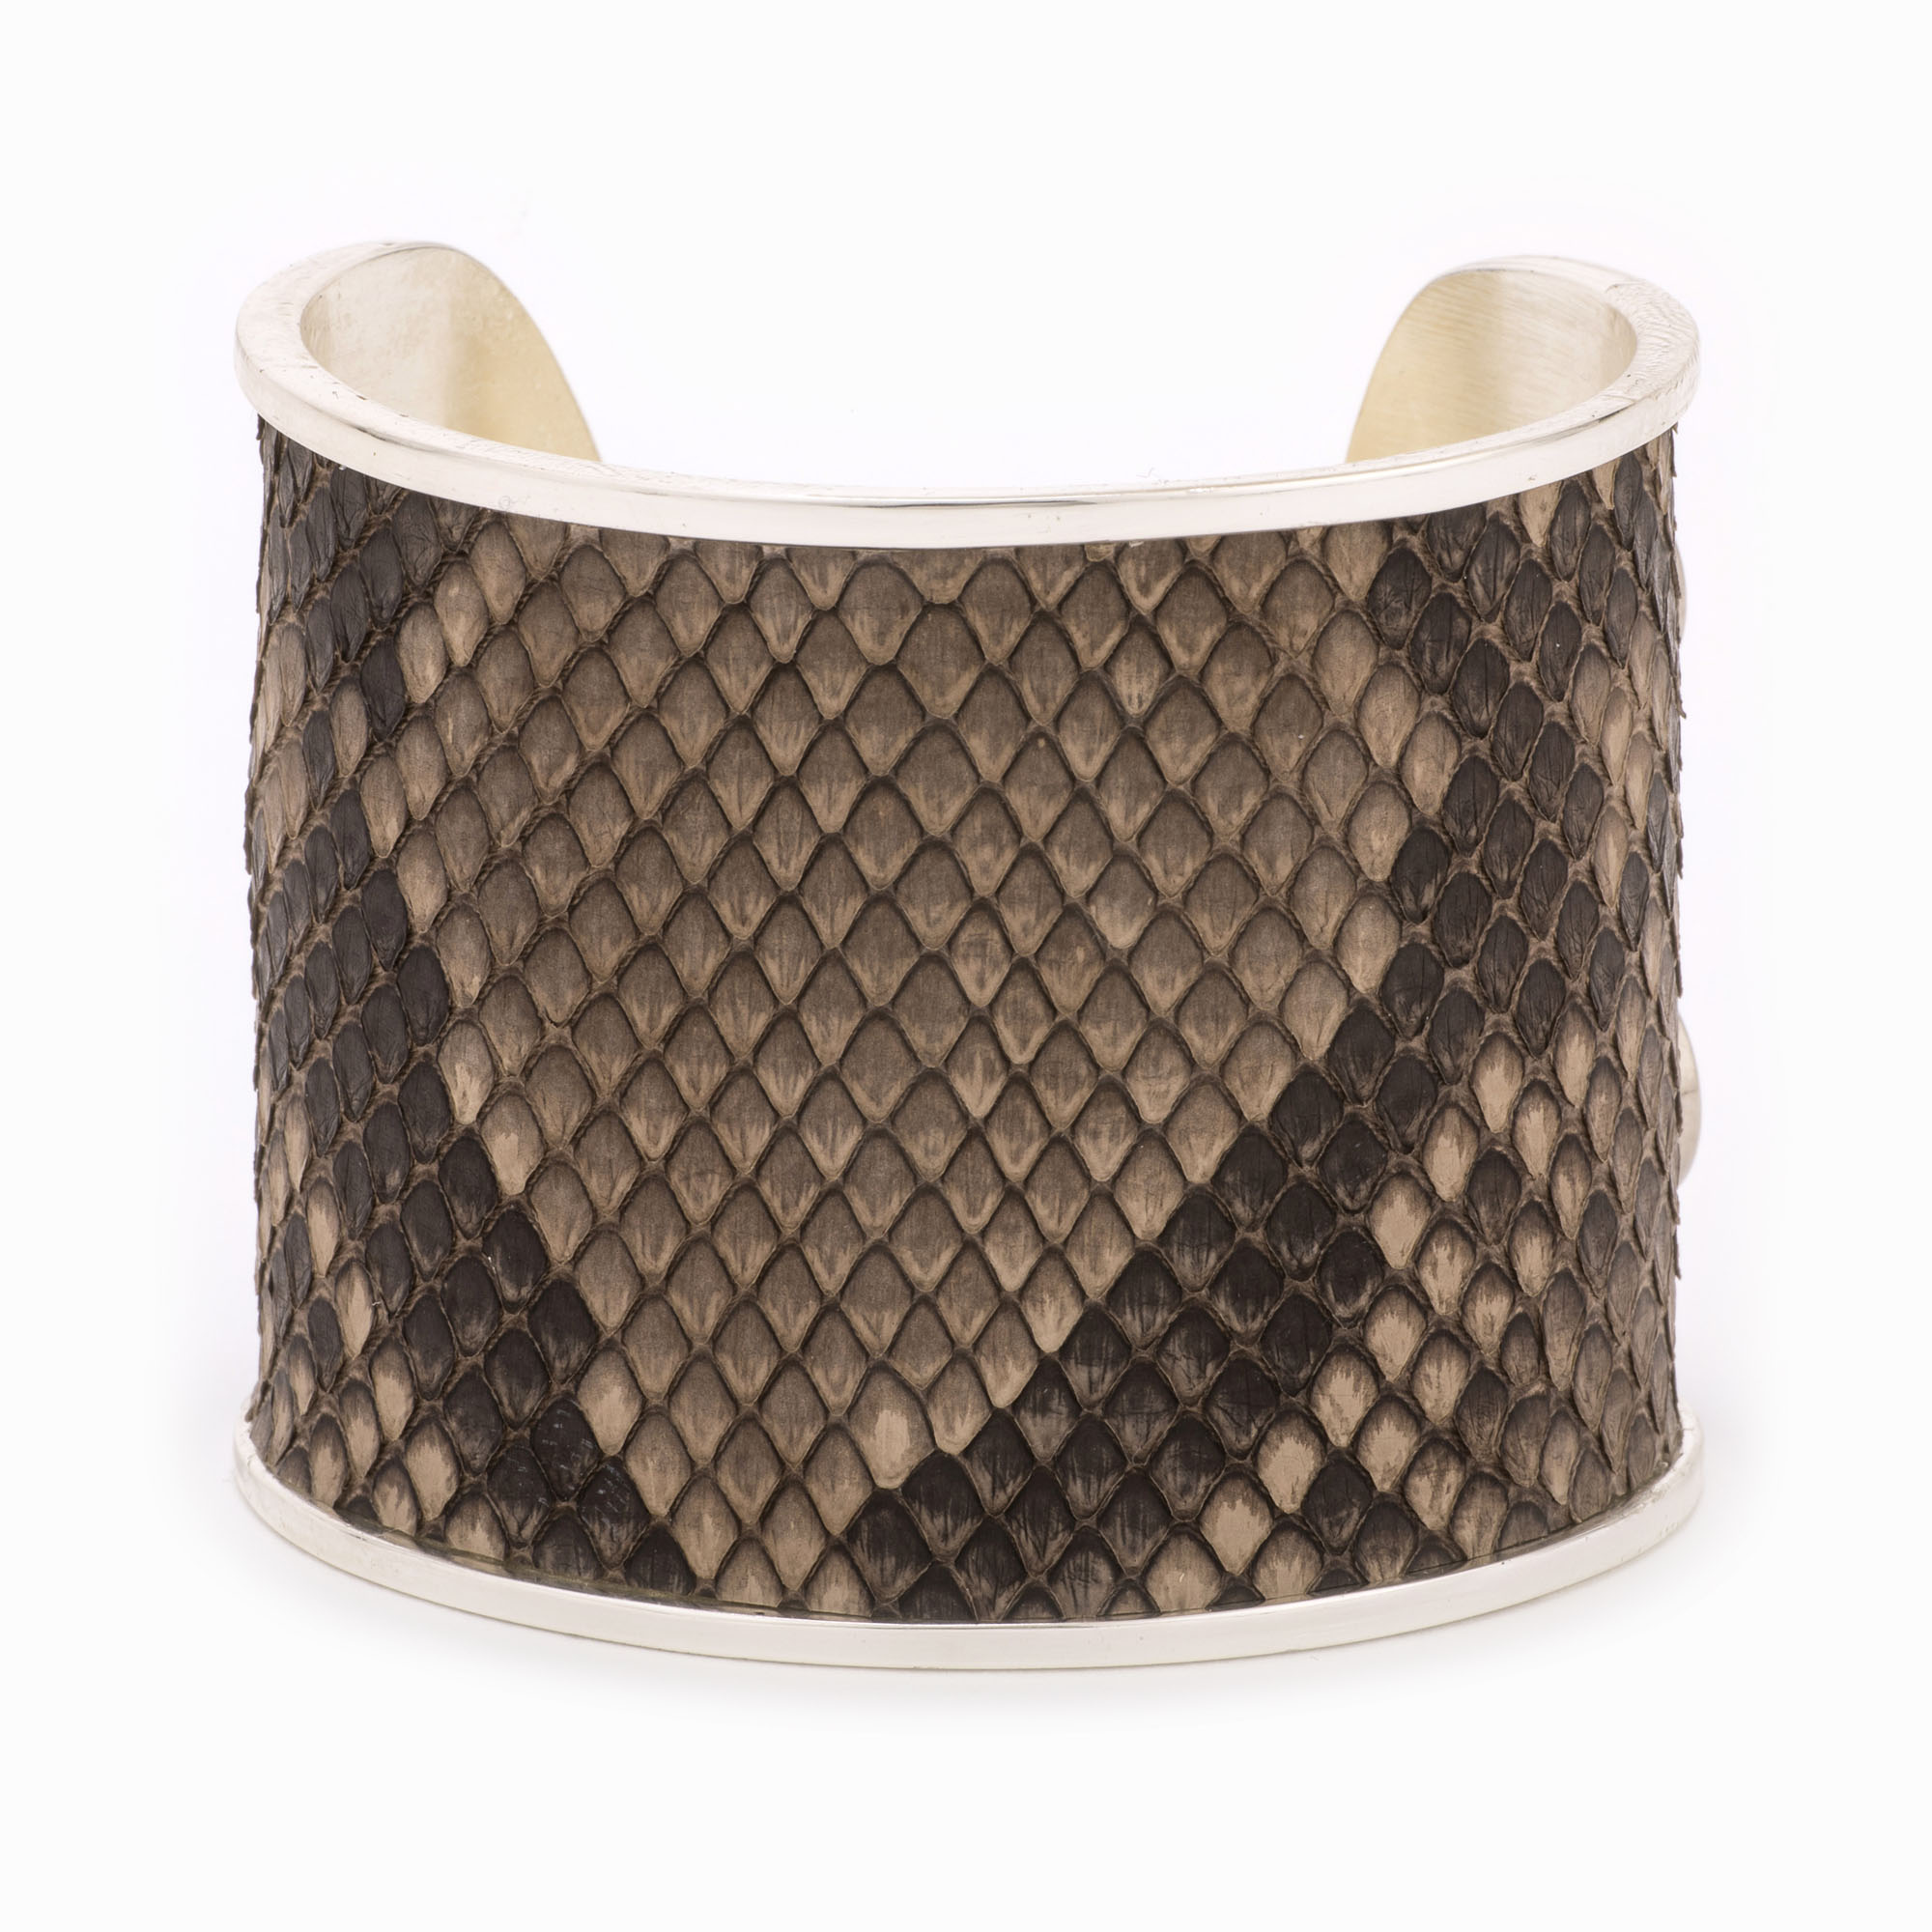 Featured image for “Large Grey & Brown Silver Cuff”